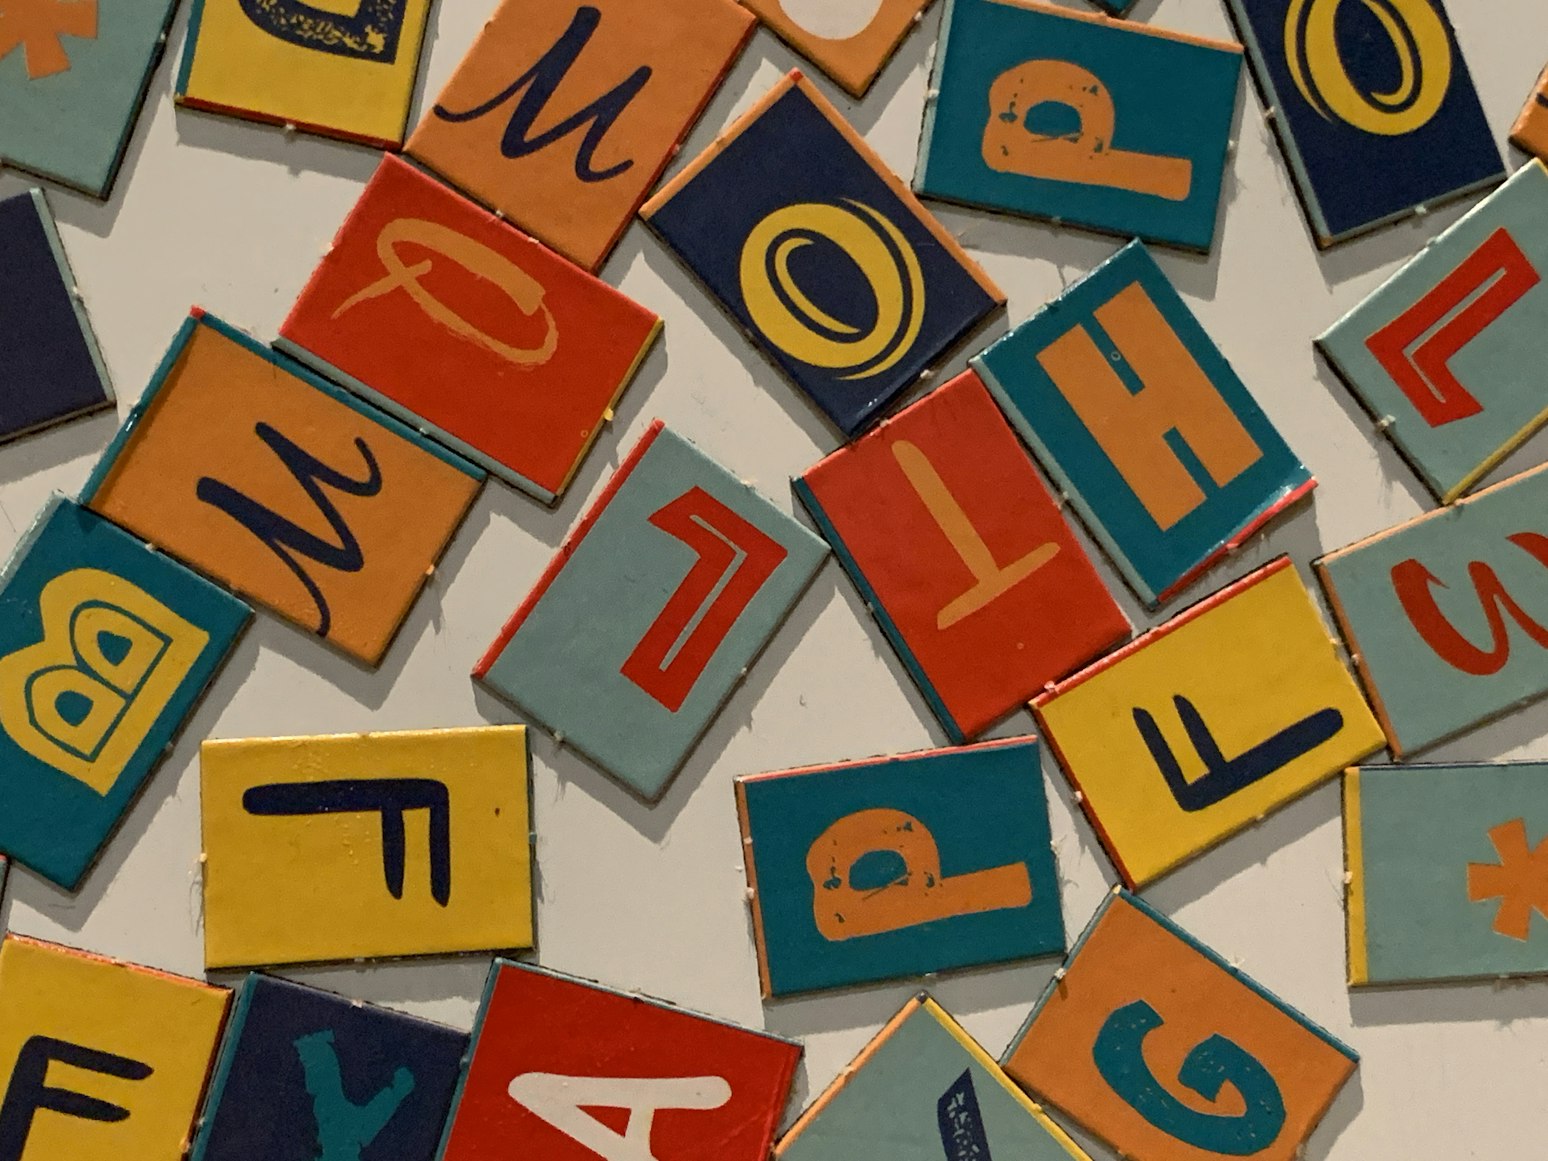 a close up of a pile of colorful wooden blocks with letters on them